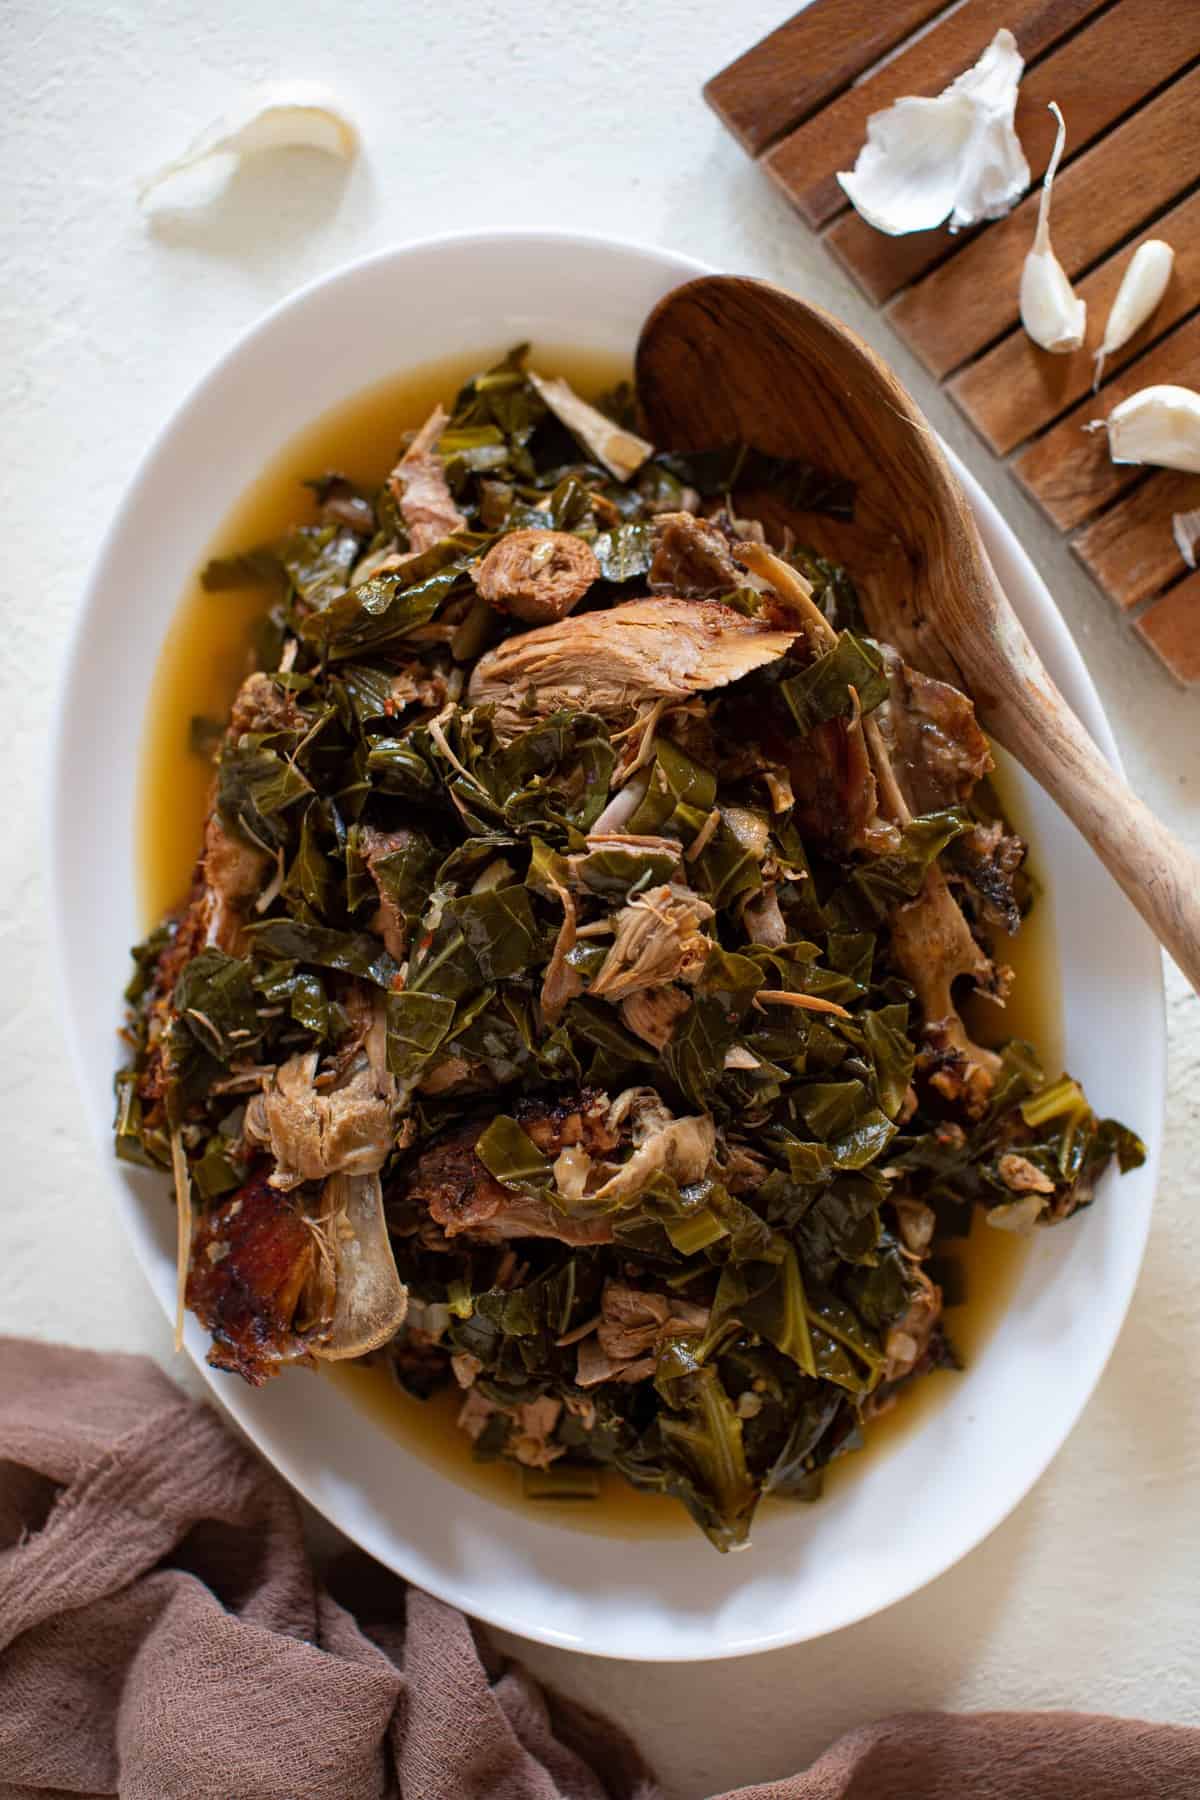 All about collard greens: Handling, preparing and storing - Food & Health